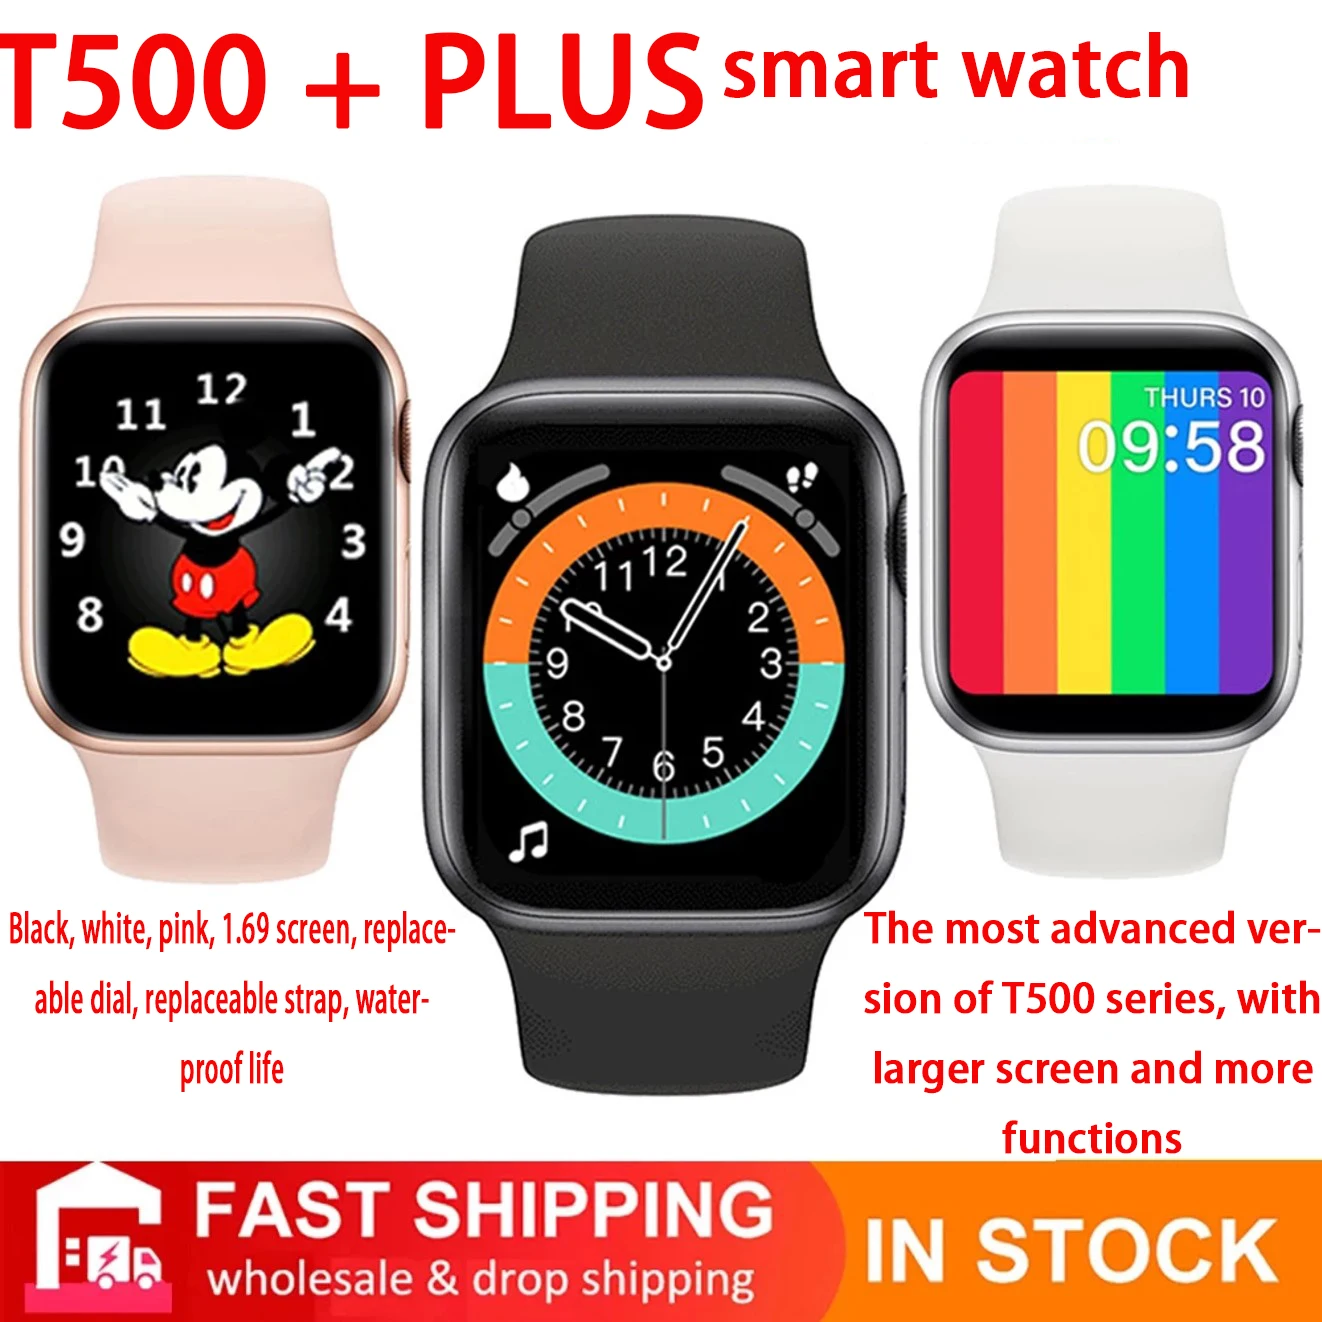 

2021 new T500 + Plus smart watch series 6 IWO 13 12 1.69 Inch For Android IOS Phone PK T500 T900 T800 W26 W46 X7 FK88 PRO FK99